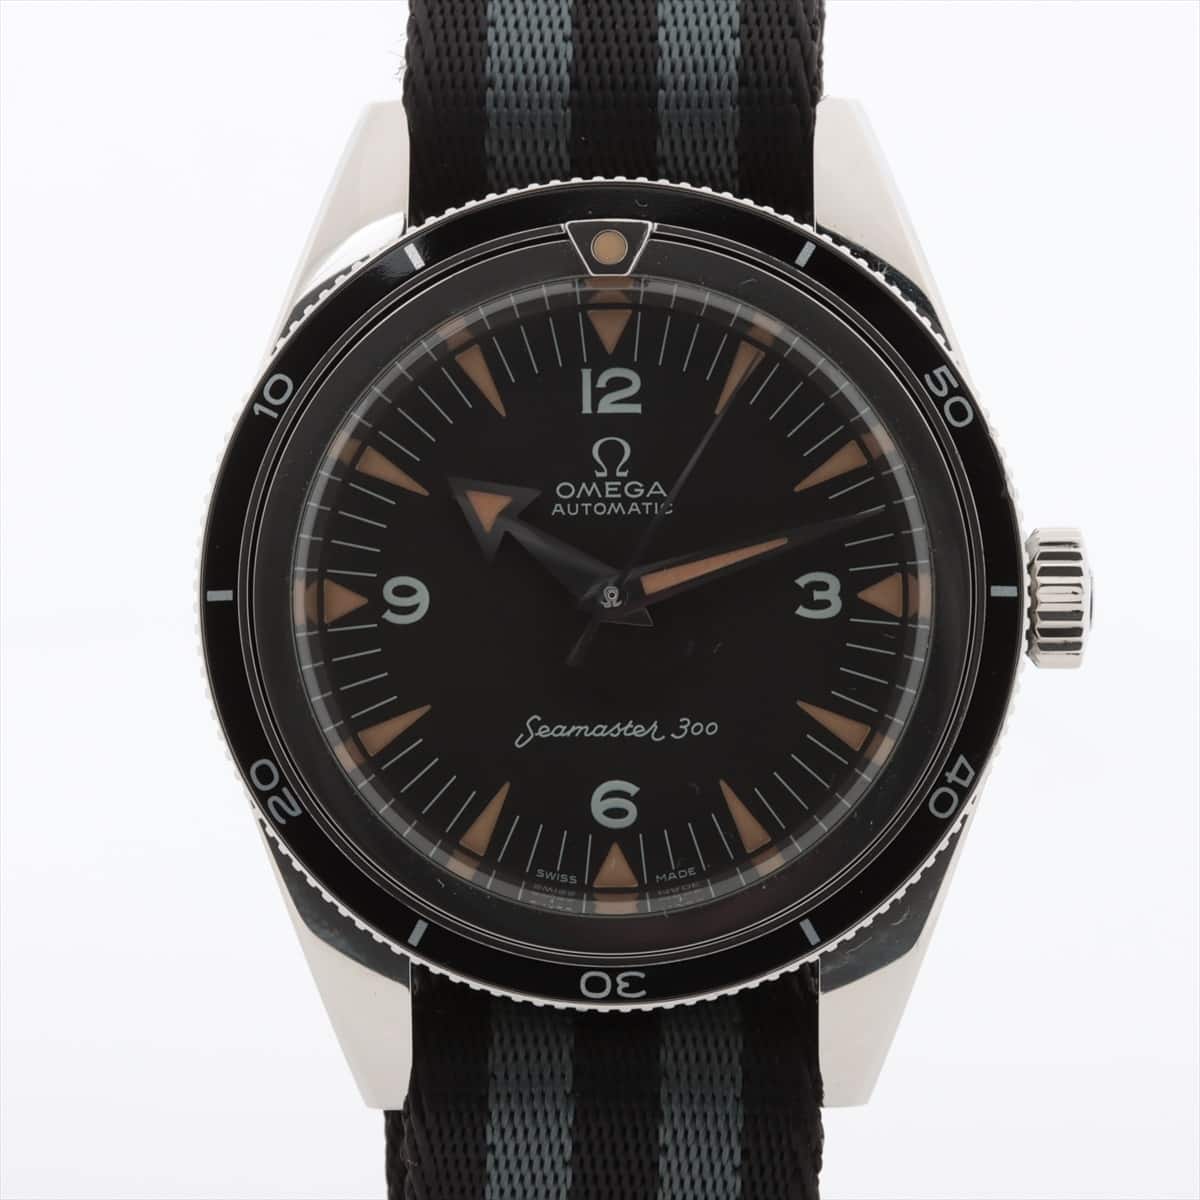 [Chrono] Omega Seamaster 1957 trilogy 234.10.39.20.01.001 SS & Nylon AT Black-Face Limited Edition Limited to 3557